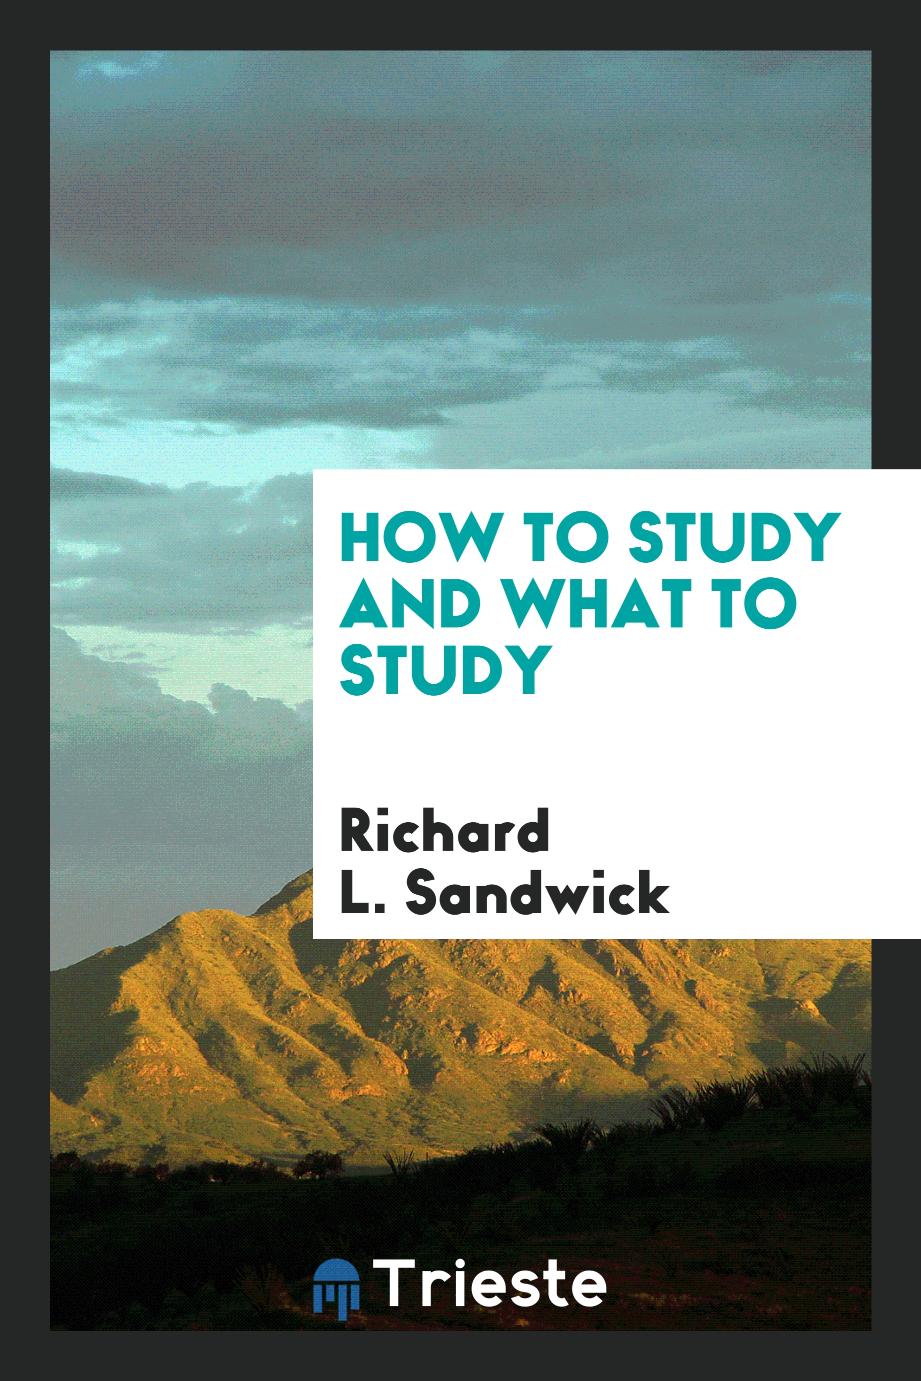 How to Study and what to Study